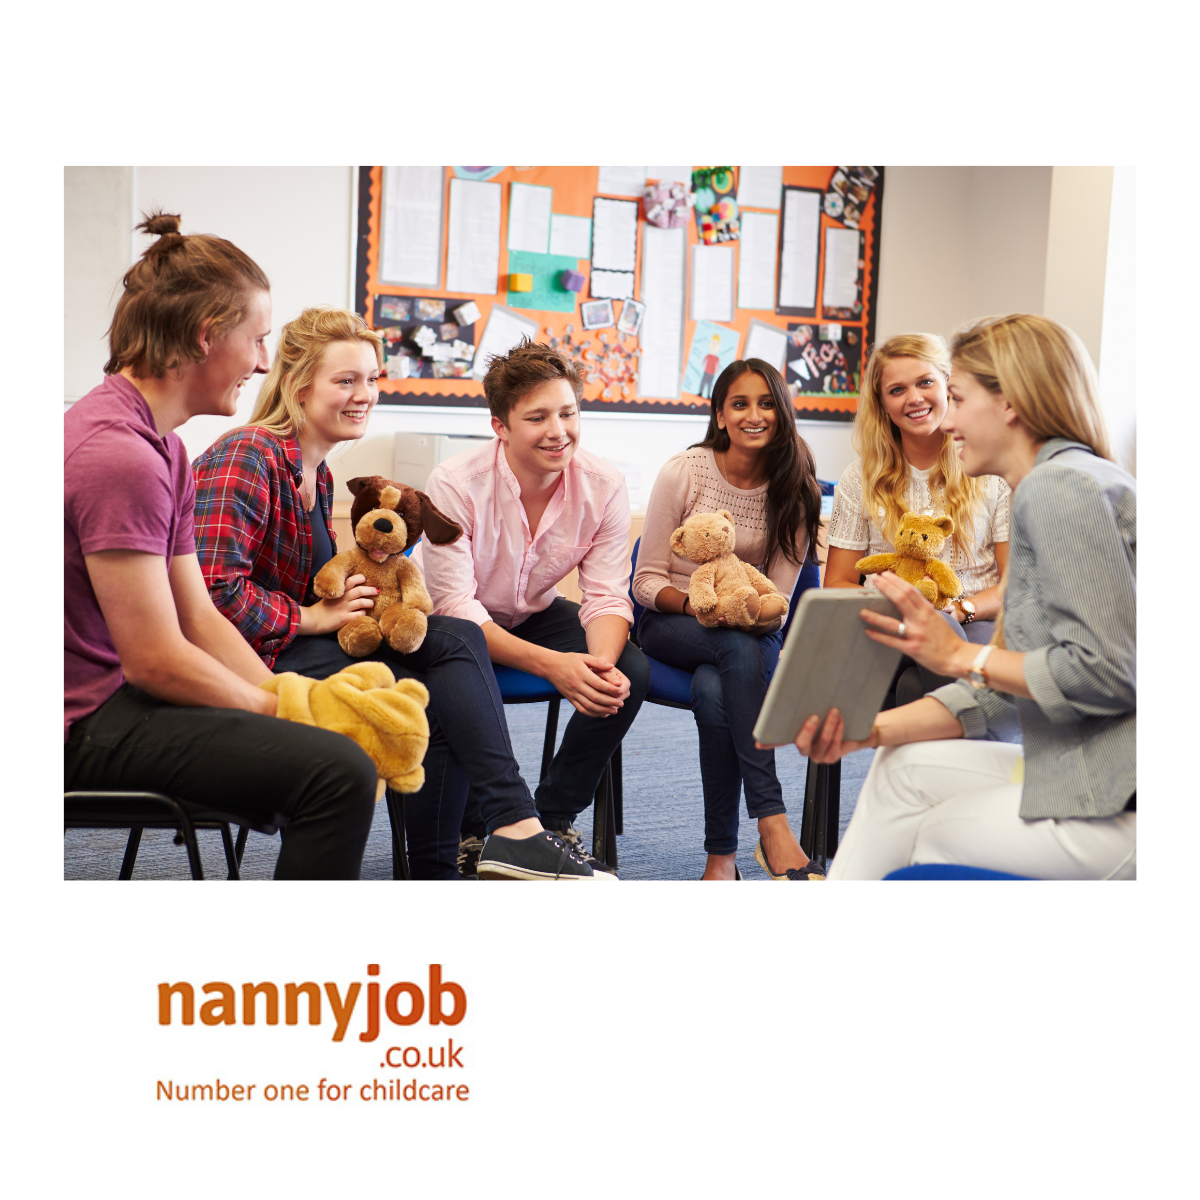 Suitable Qualifications for Nannies and Childcarers in the UK